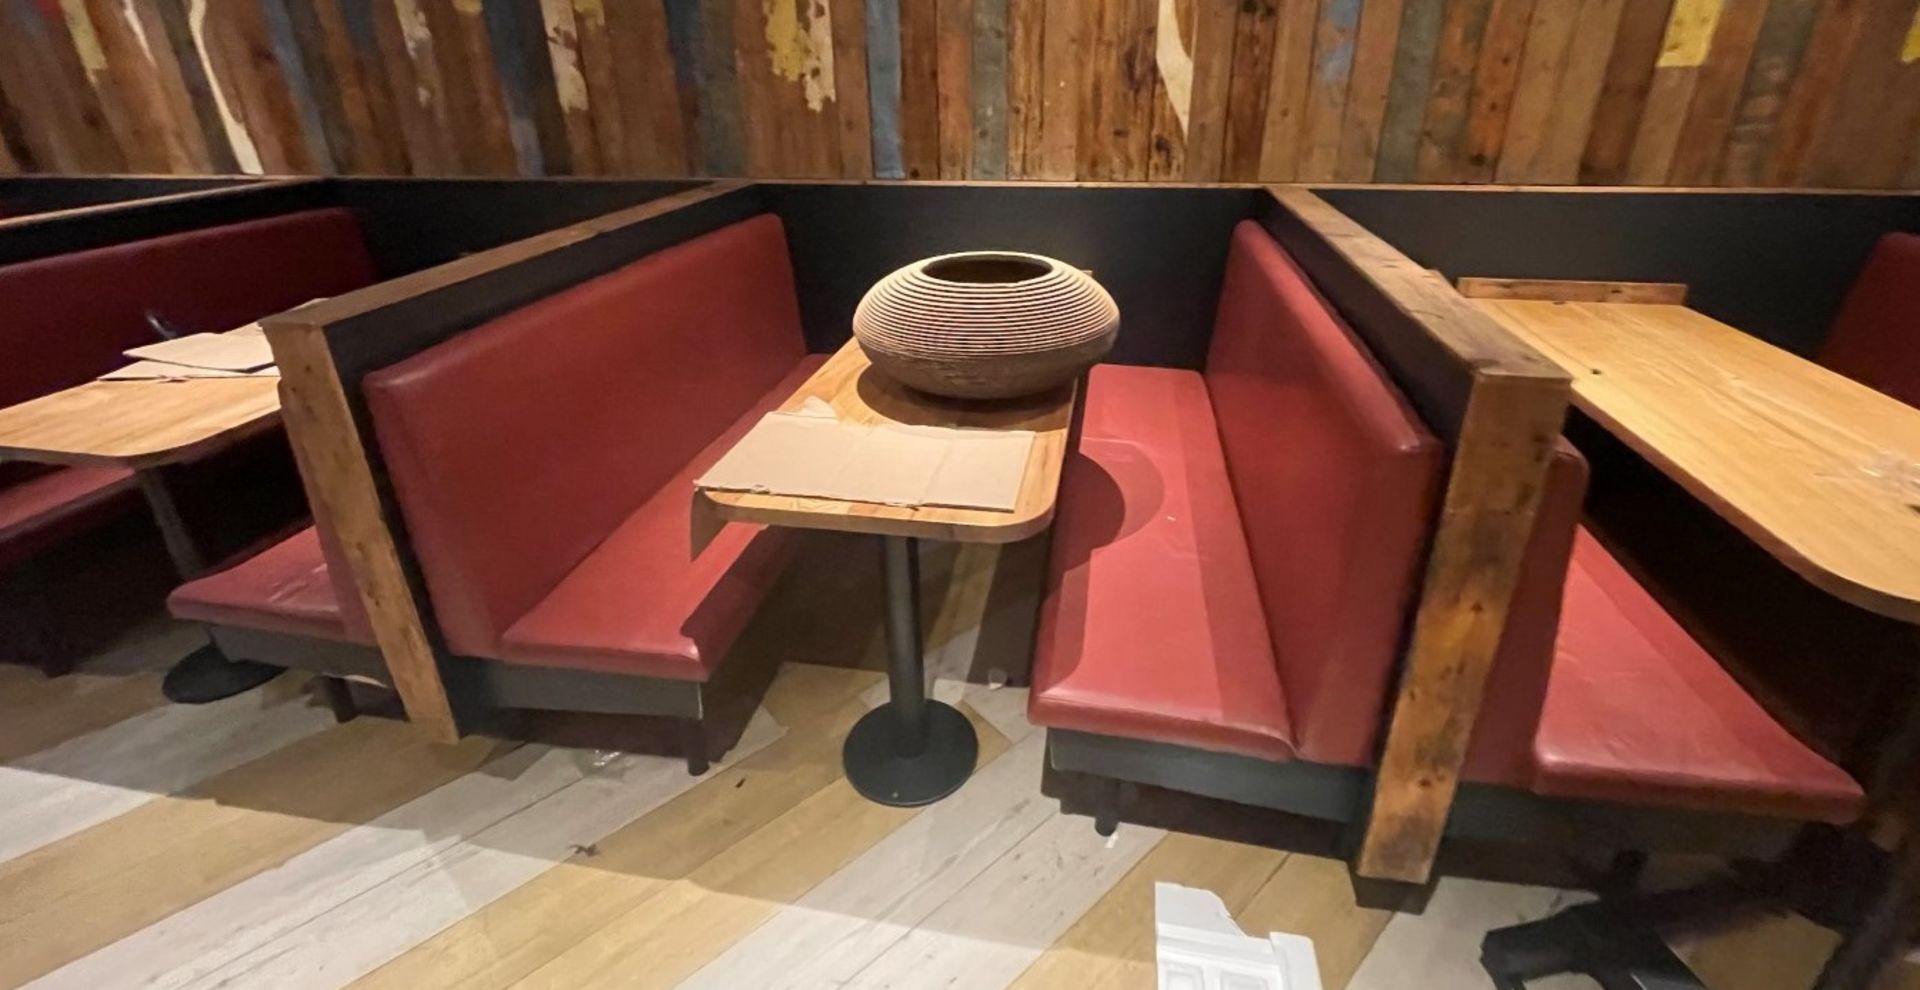 5 x Restaurant Leather Seating Booths With Oak Tables - Includes 10 x Seating Benches Upholstered in - Image 8 of 11